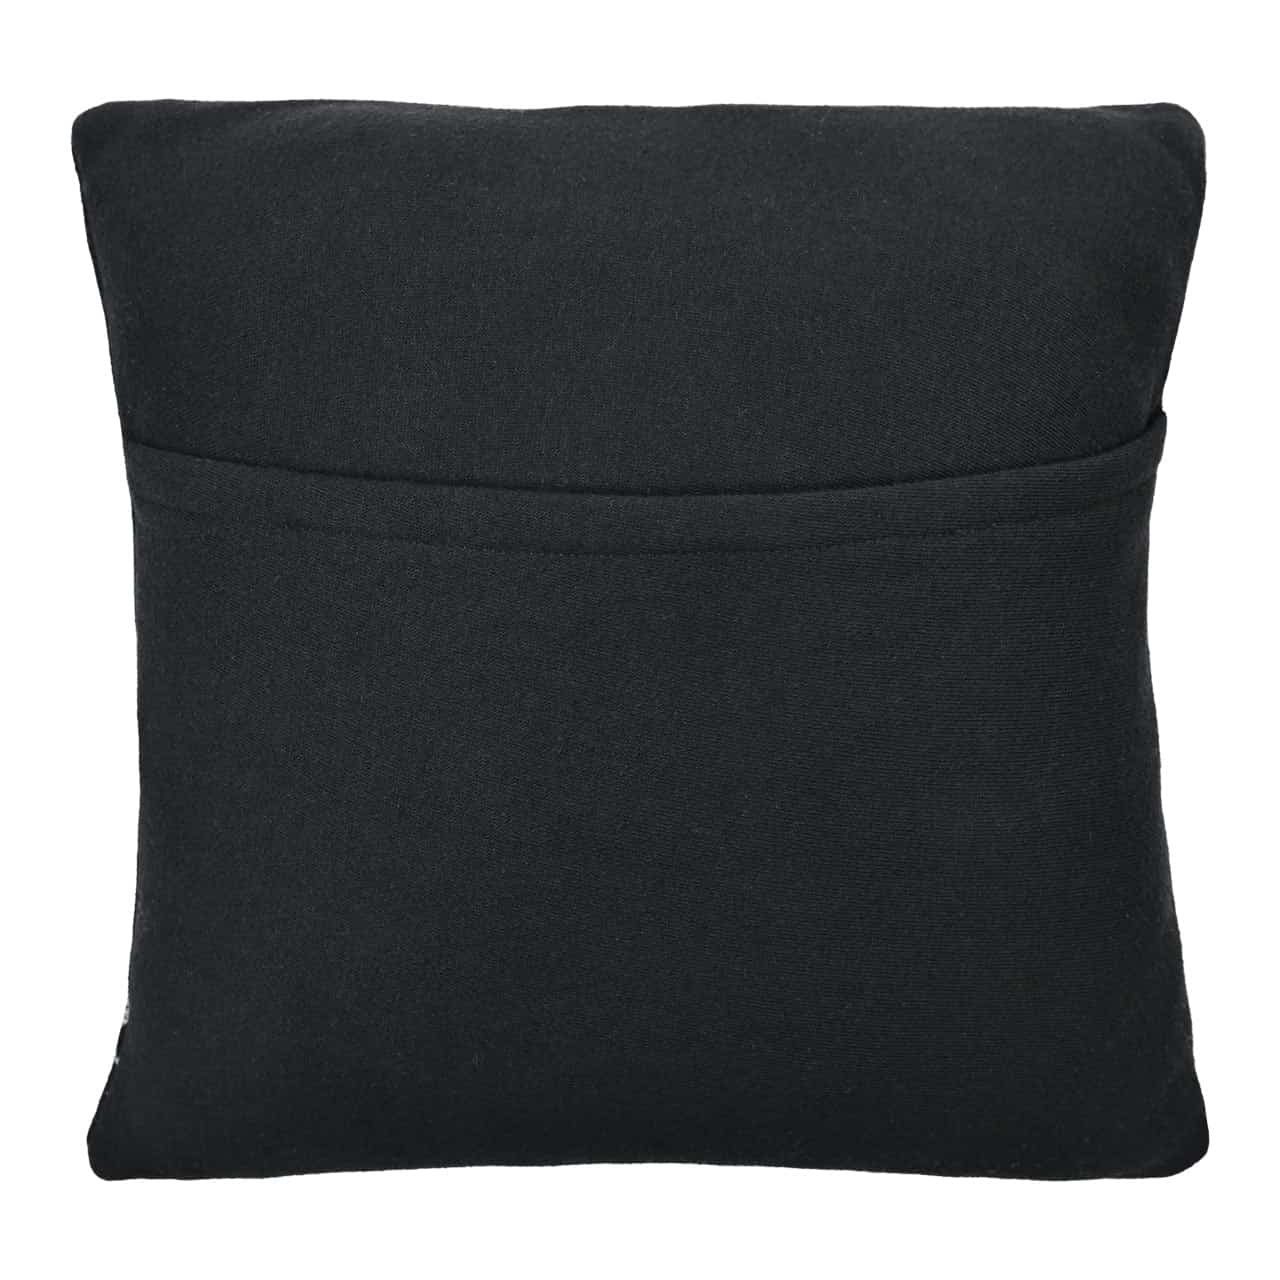 awesamdude Circuit Board Handcrafted Pillow